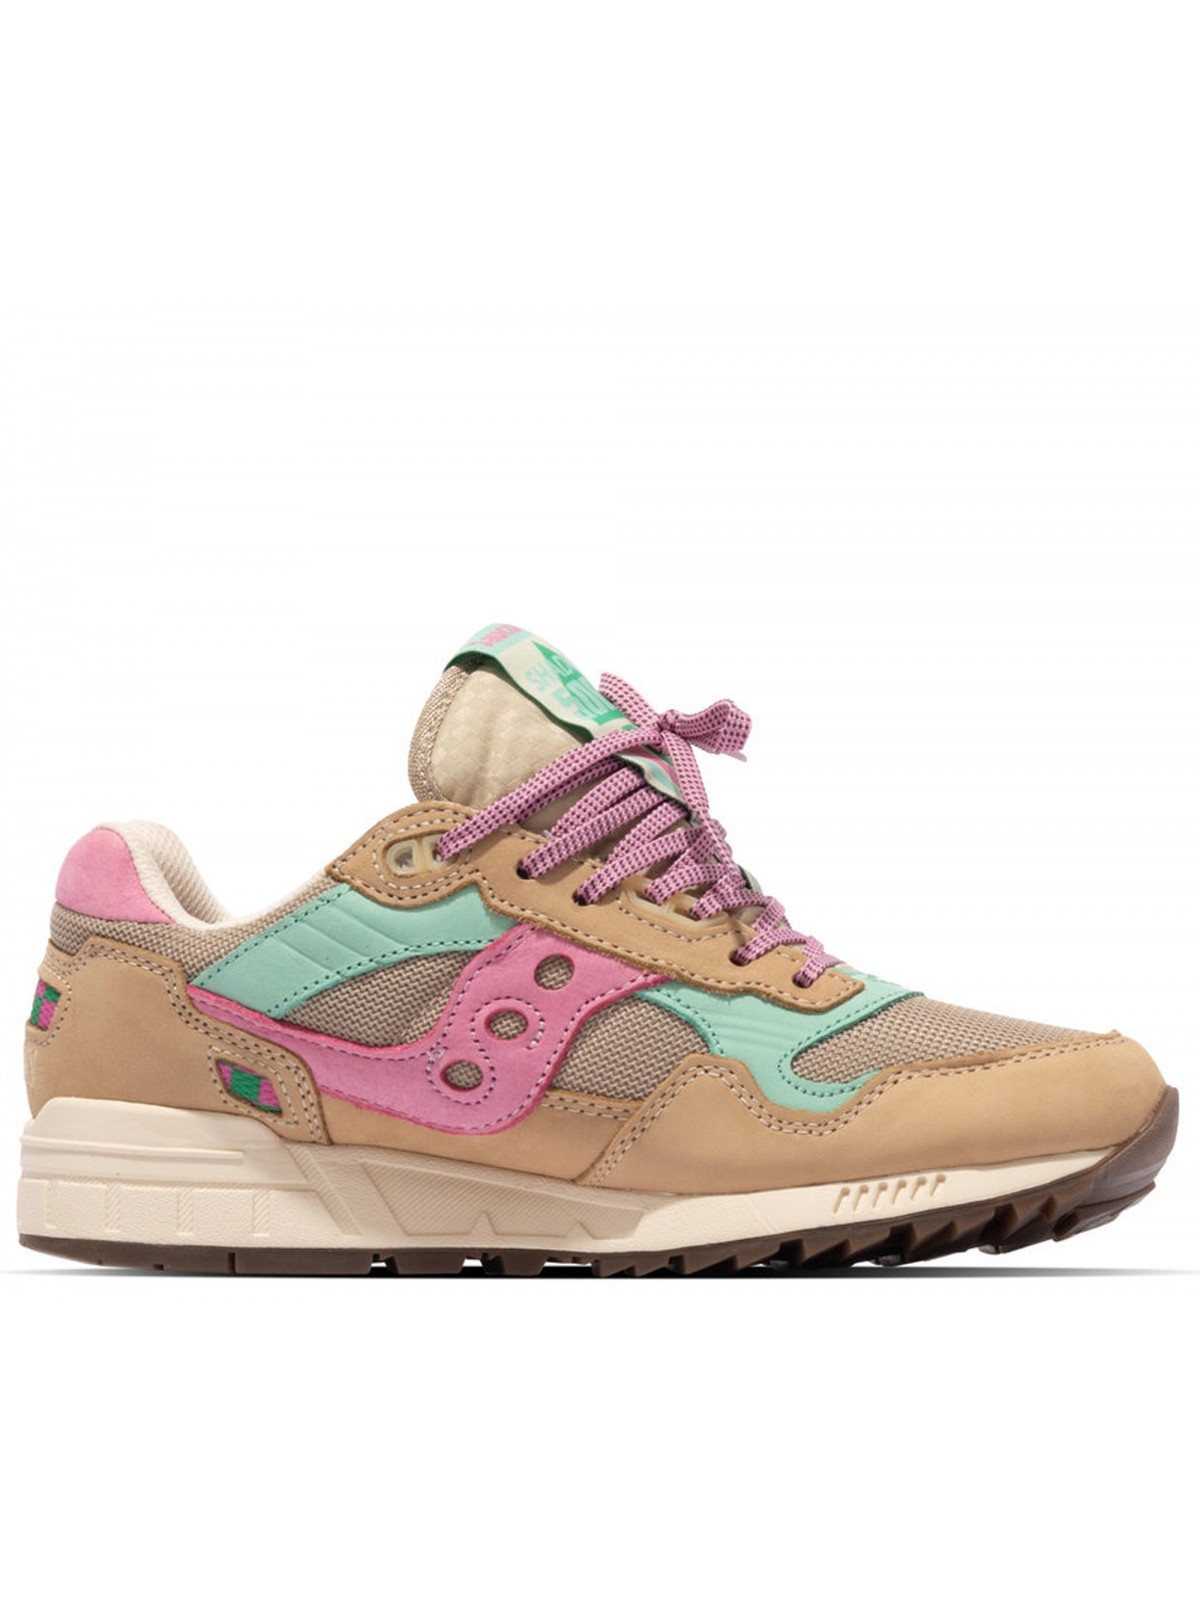 Saucony Shadow Gray Pink